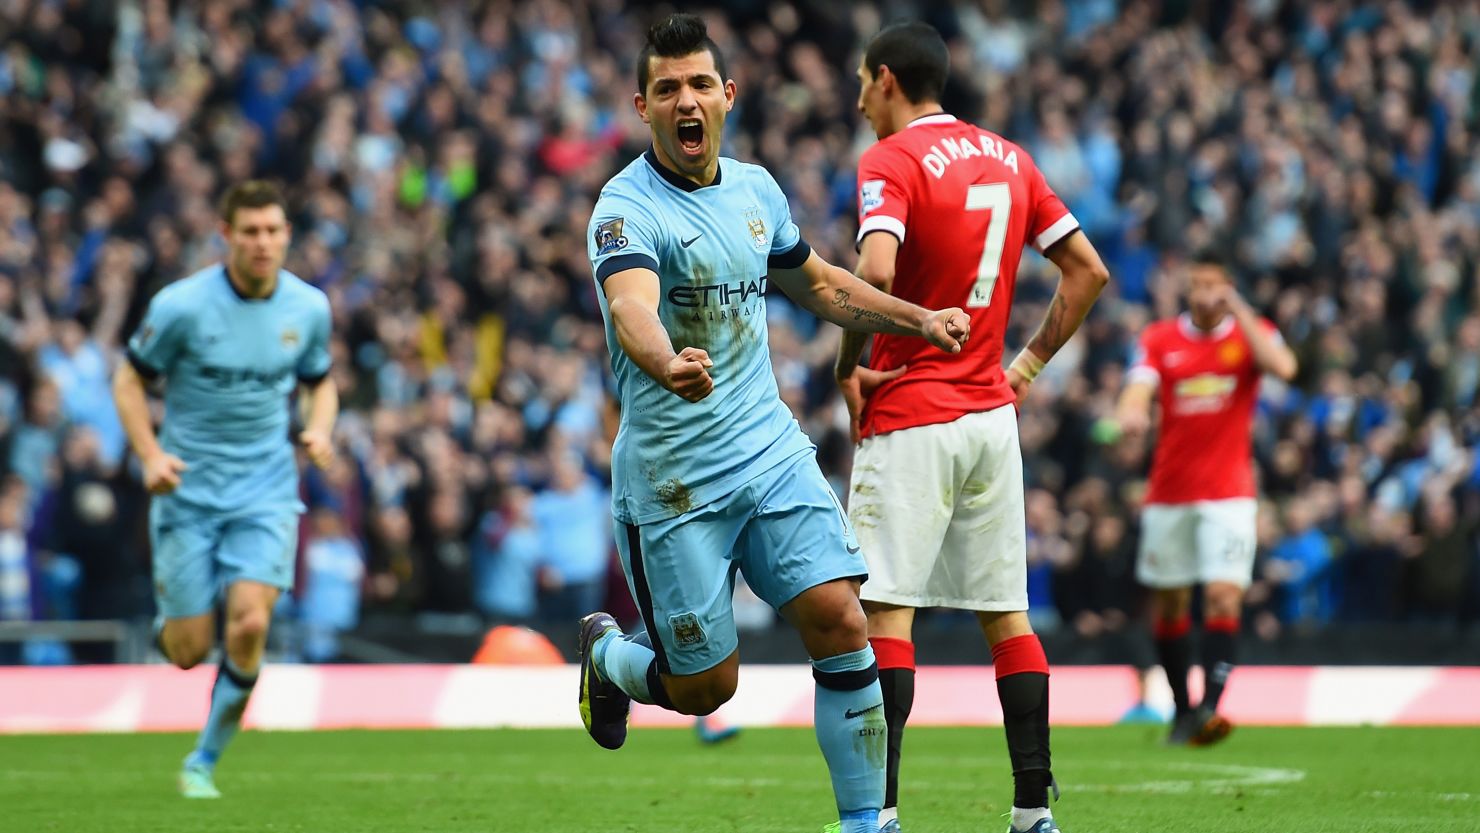 Sergio Aguero celebrates scoring the only goal of the Manchester derby on 2 November 2014.